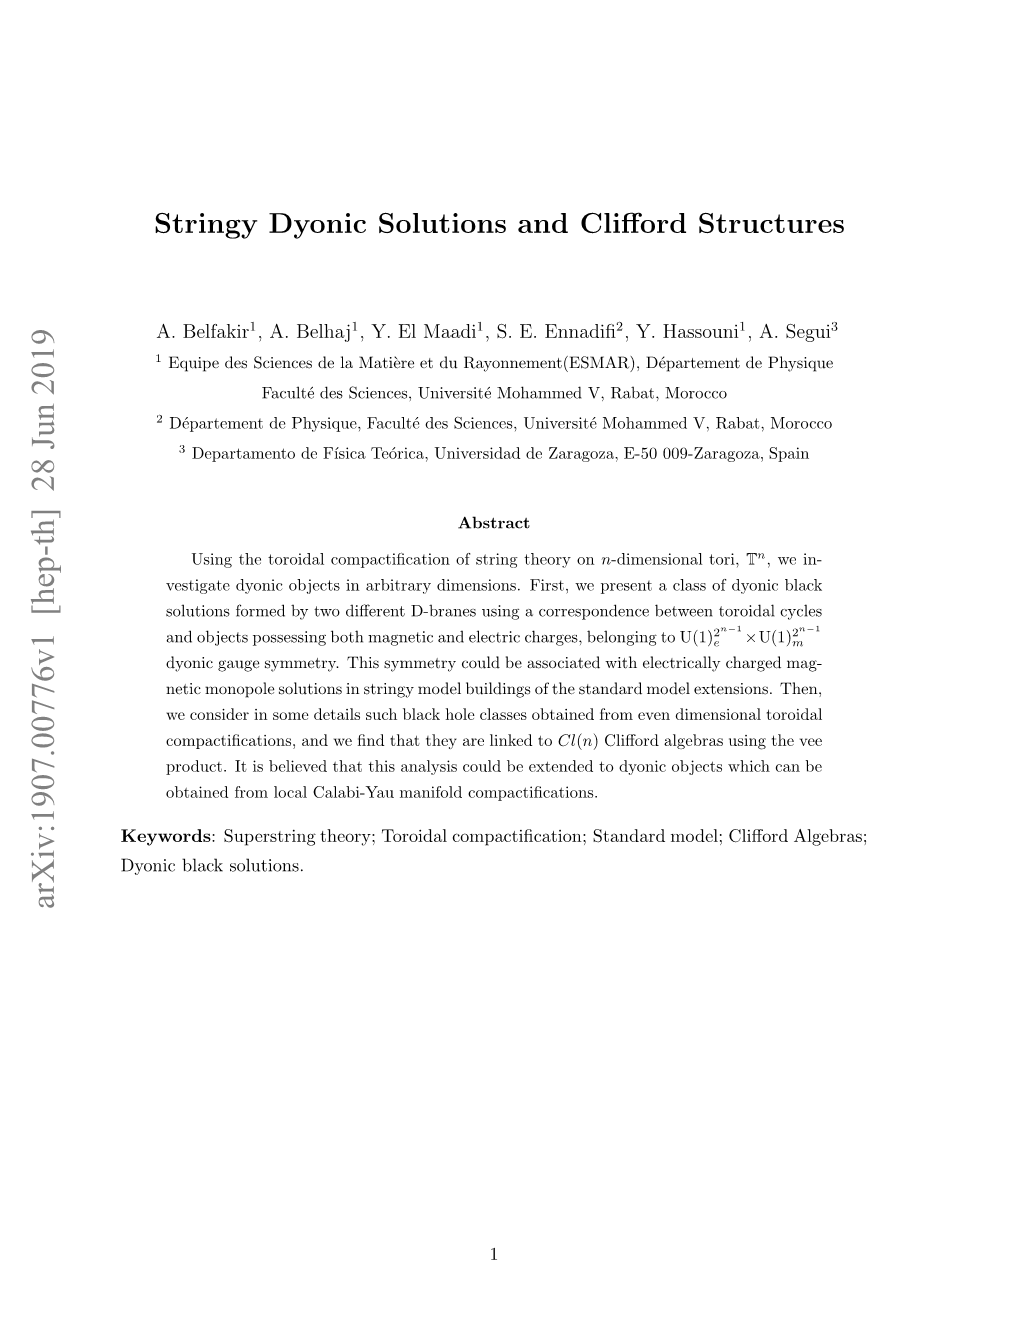 Stringy Dyonic Solutions and Clifford Structures